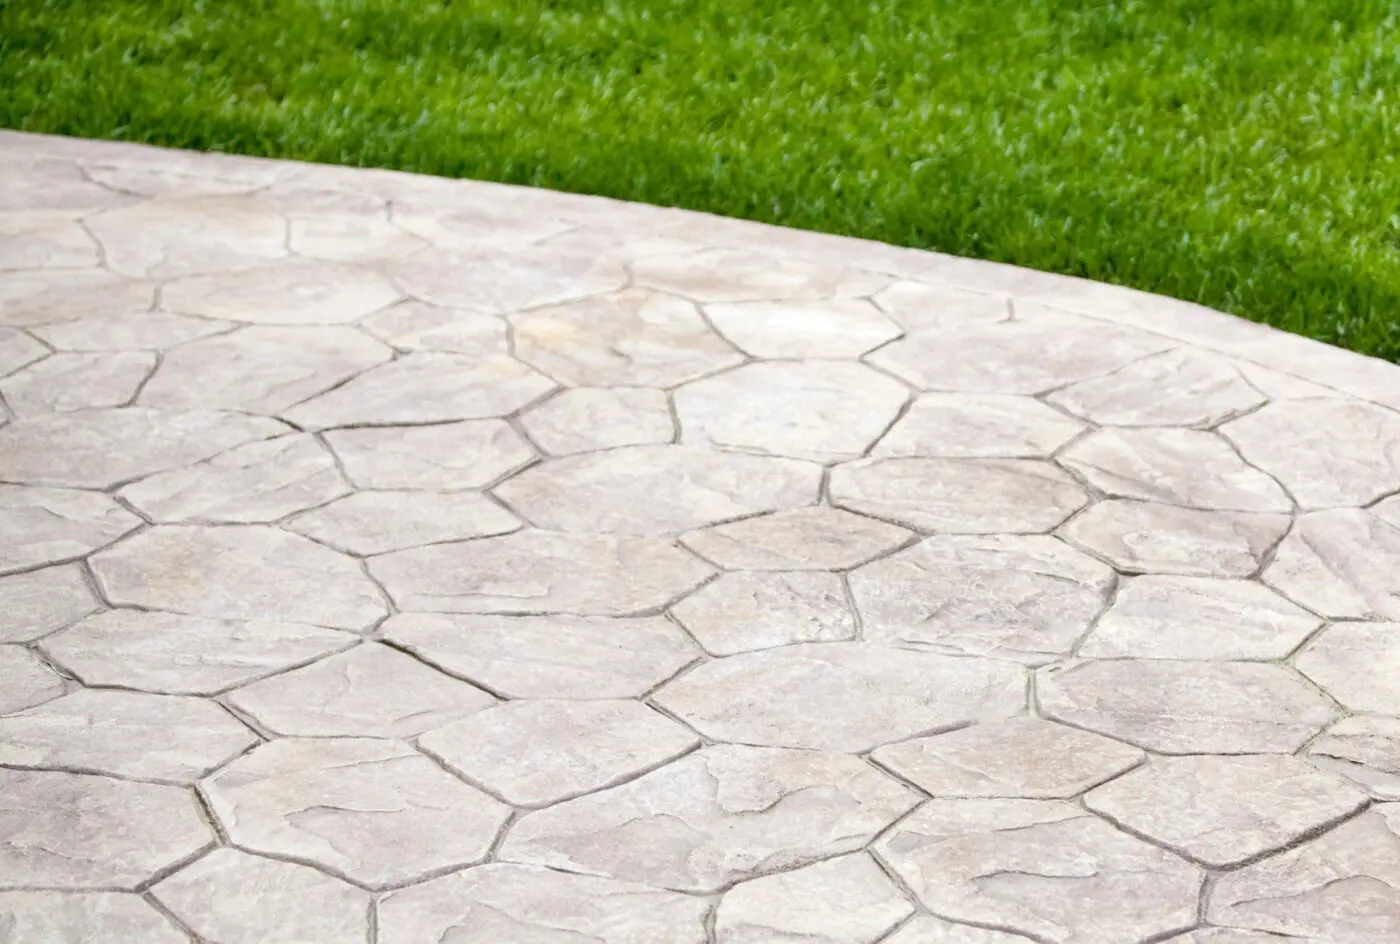 A close-up view of a stone patio with a textured, irregular-shaped pattern, typical of concrete patios in Miami FL. The patio lies adjacent to a lush, green lawn, providing a contrast in colors and textures. The scene is outdoors, suggesting a garden or backyard setting designed by a decorative concrete contractor.